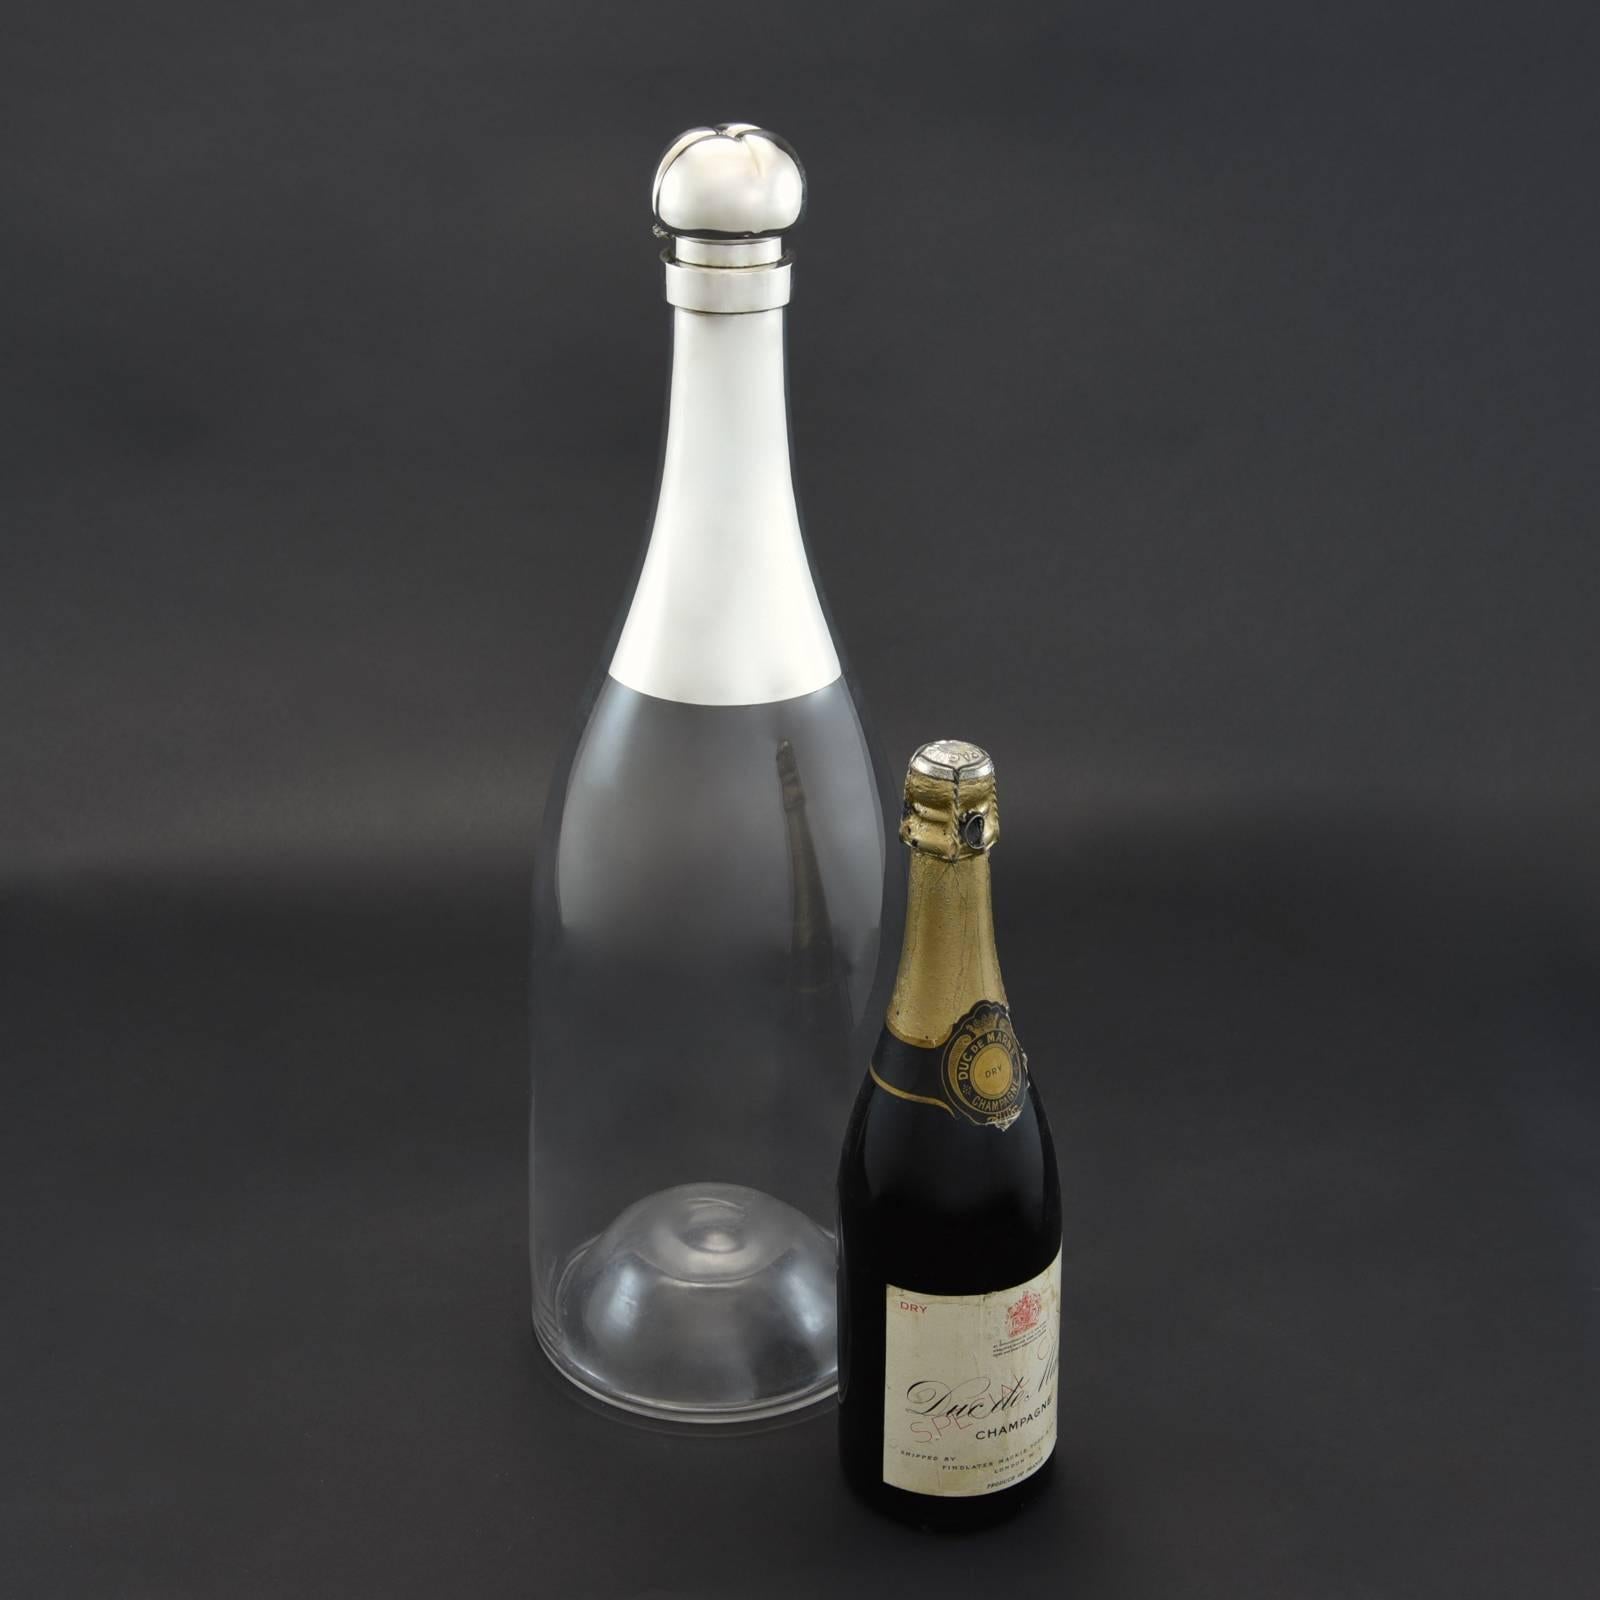 Great Britain (UK) Extraordinary Giant Champagne Bottle Decanter with Sterling top, 1892